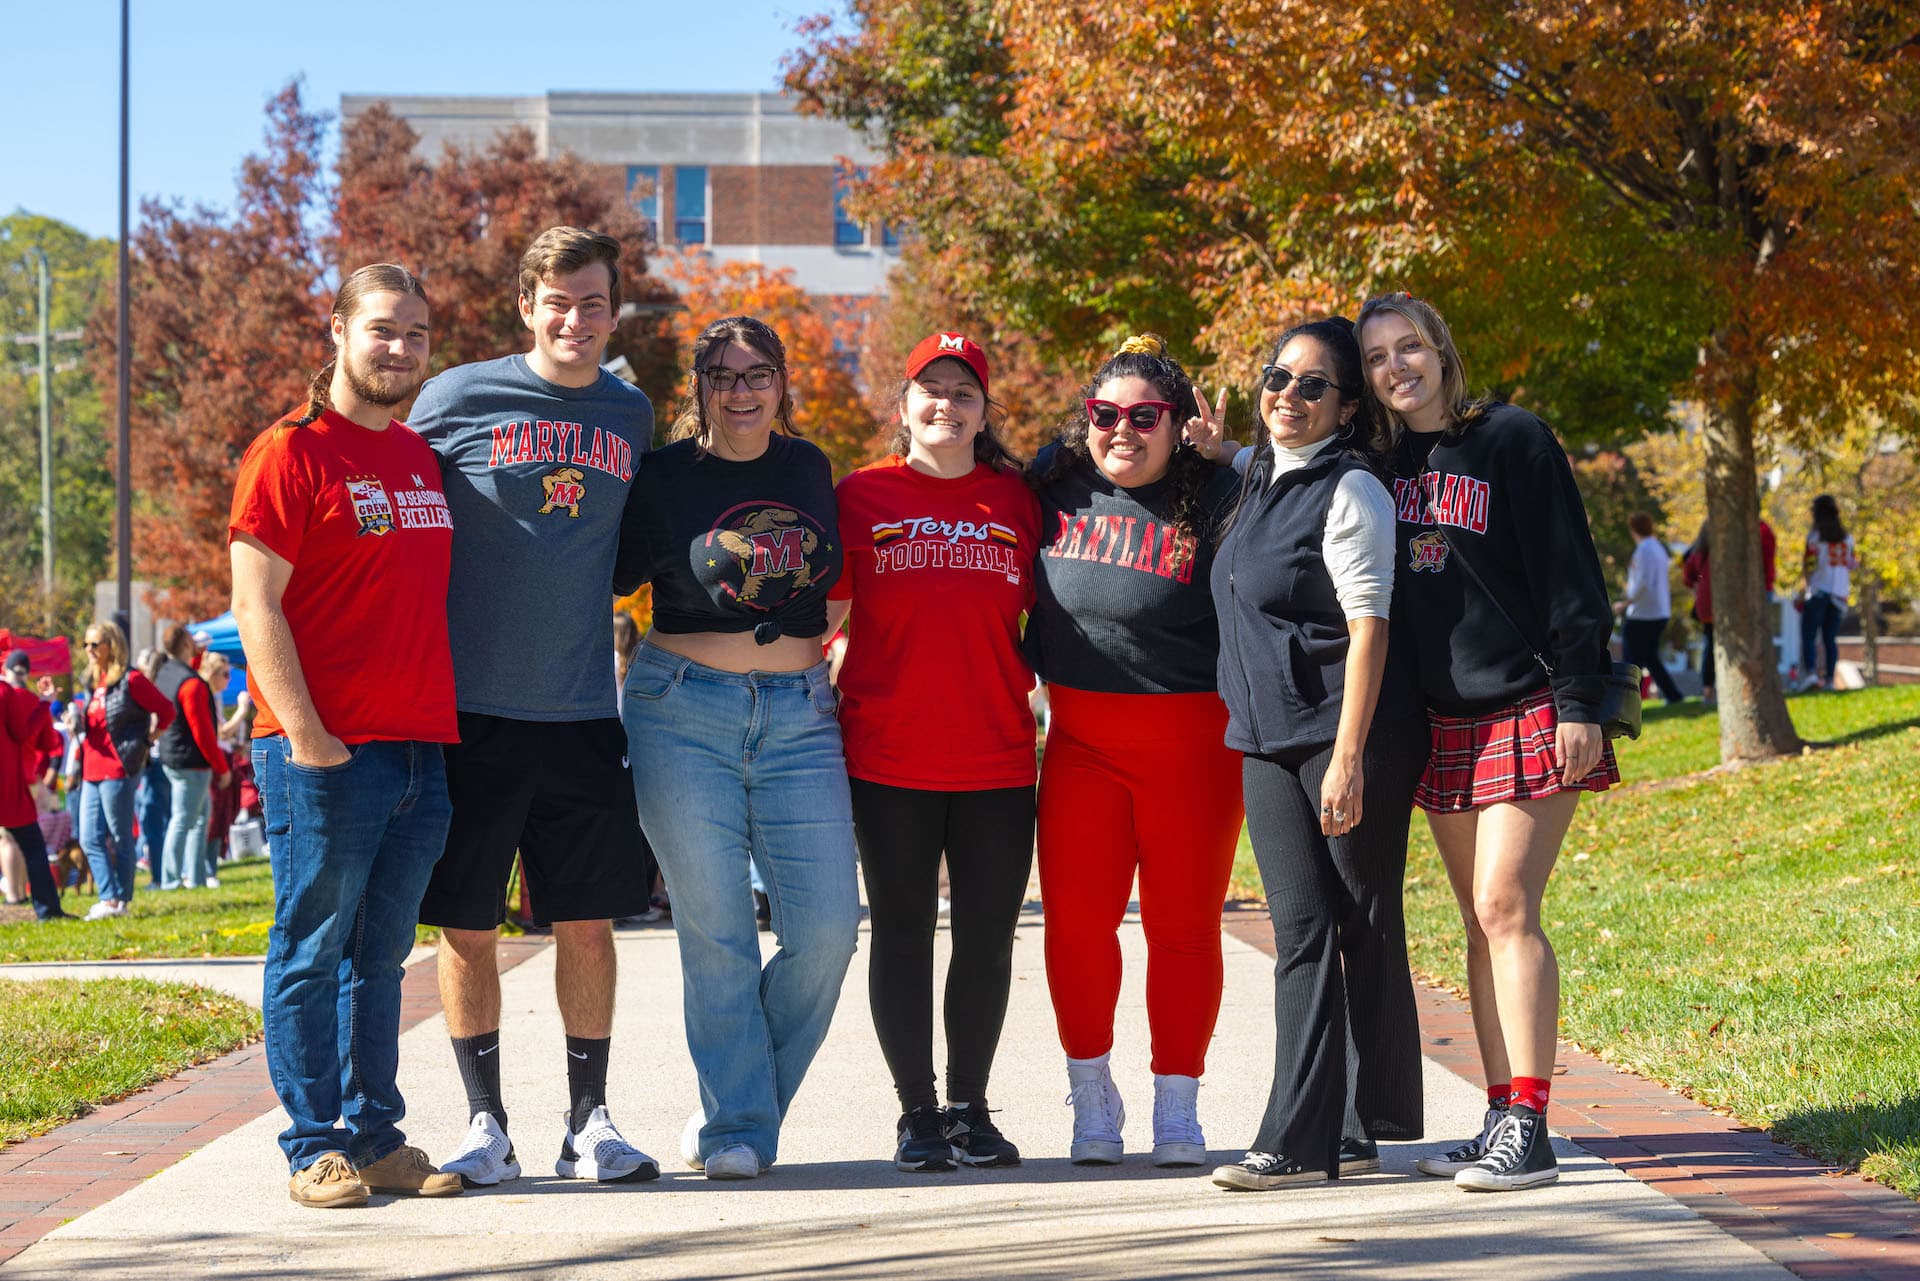 Students pose for a photo at a Homecoming tailgate.